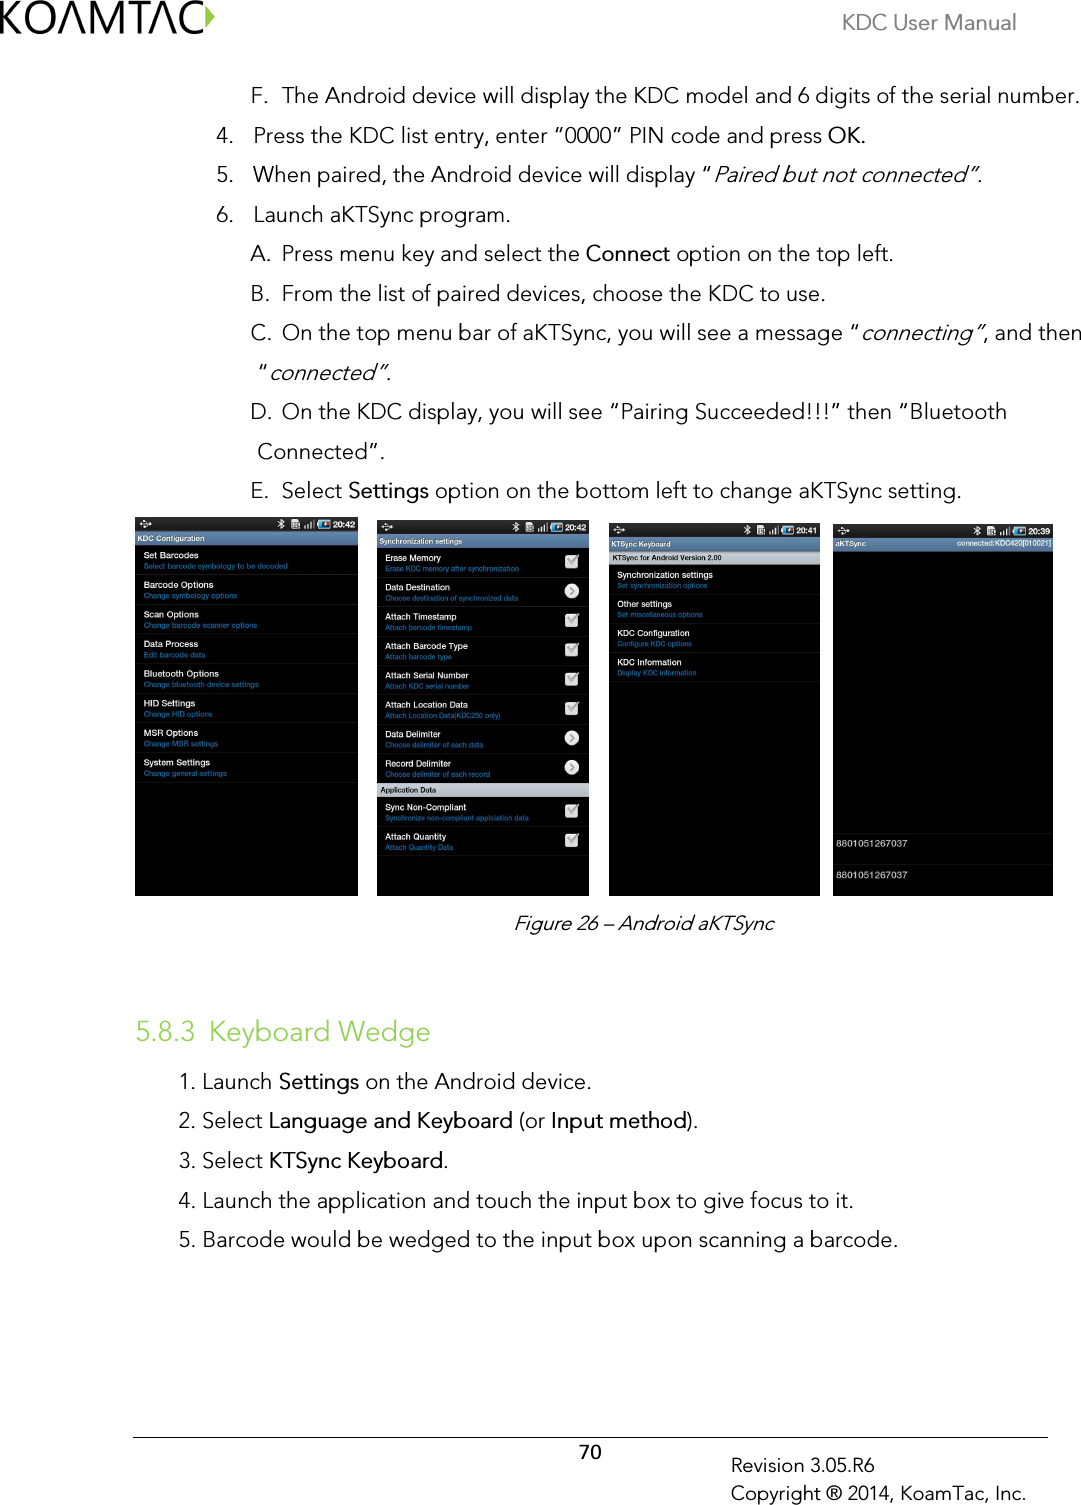 KDC User Manual  70 Revision 3.05.R6 Copyright ® 2014, KoamTac, Inc. F. The Android device will display the KDC model and 6 digits of the serial number.  4. Press the KDC list entry, enter “0000” PIN code and press OK. 5. When paired, the Android device will display “Paired but not connected”. 6. Launch aKTSync program.  A. Press menu key and select the Connect option on the top left. B. From the list of paired devices, choose the KDC to use. C. On the top menu bar of aKTSync, you will see a message “connecting”, and then “connected”. D. On the KDC display, you will see “Pairing Succeeded!!!” then “Bluetooth Connected”. E. Select Settings option on the bottom left to change aKTSync setting.                 5.8.3 Keyboard Wedge 1. Launch Settings on the Android device. 2. Select Language and Keyboard (or Input method). 3. Select KTSync Keyboard. 4. Launch the application and touch the input box to give focus to it. 5. Barcode would be wedged to the input box upon scanning a barcode.  Figure 26 – Android aKTSync 